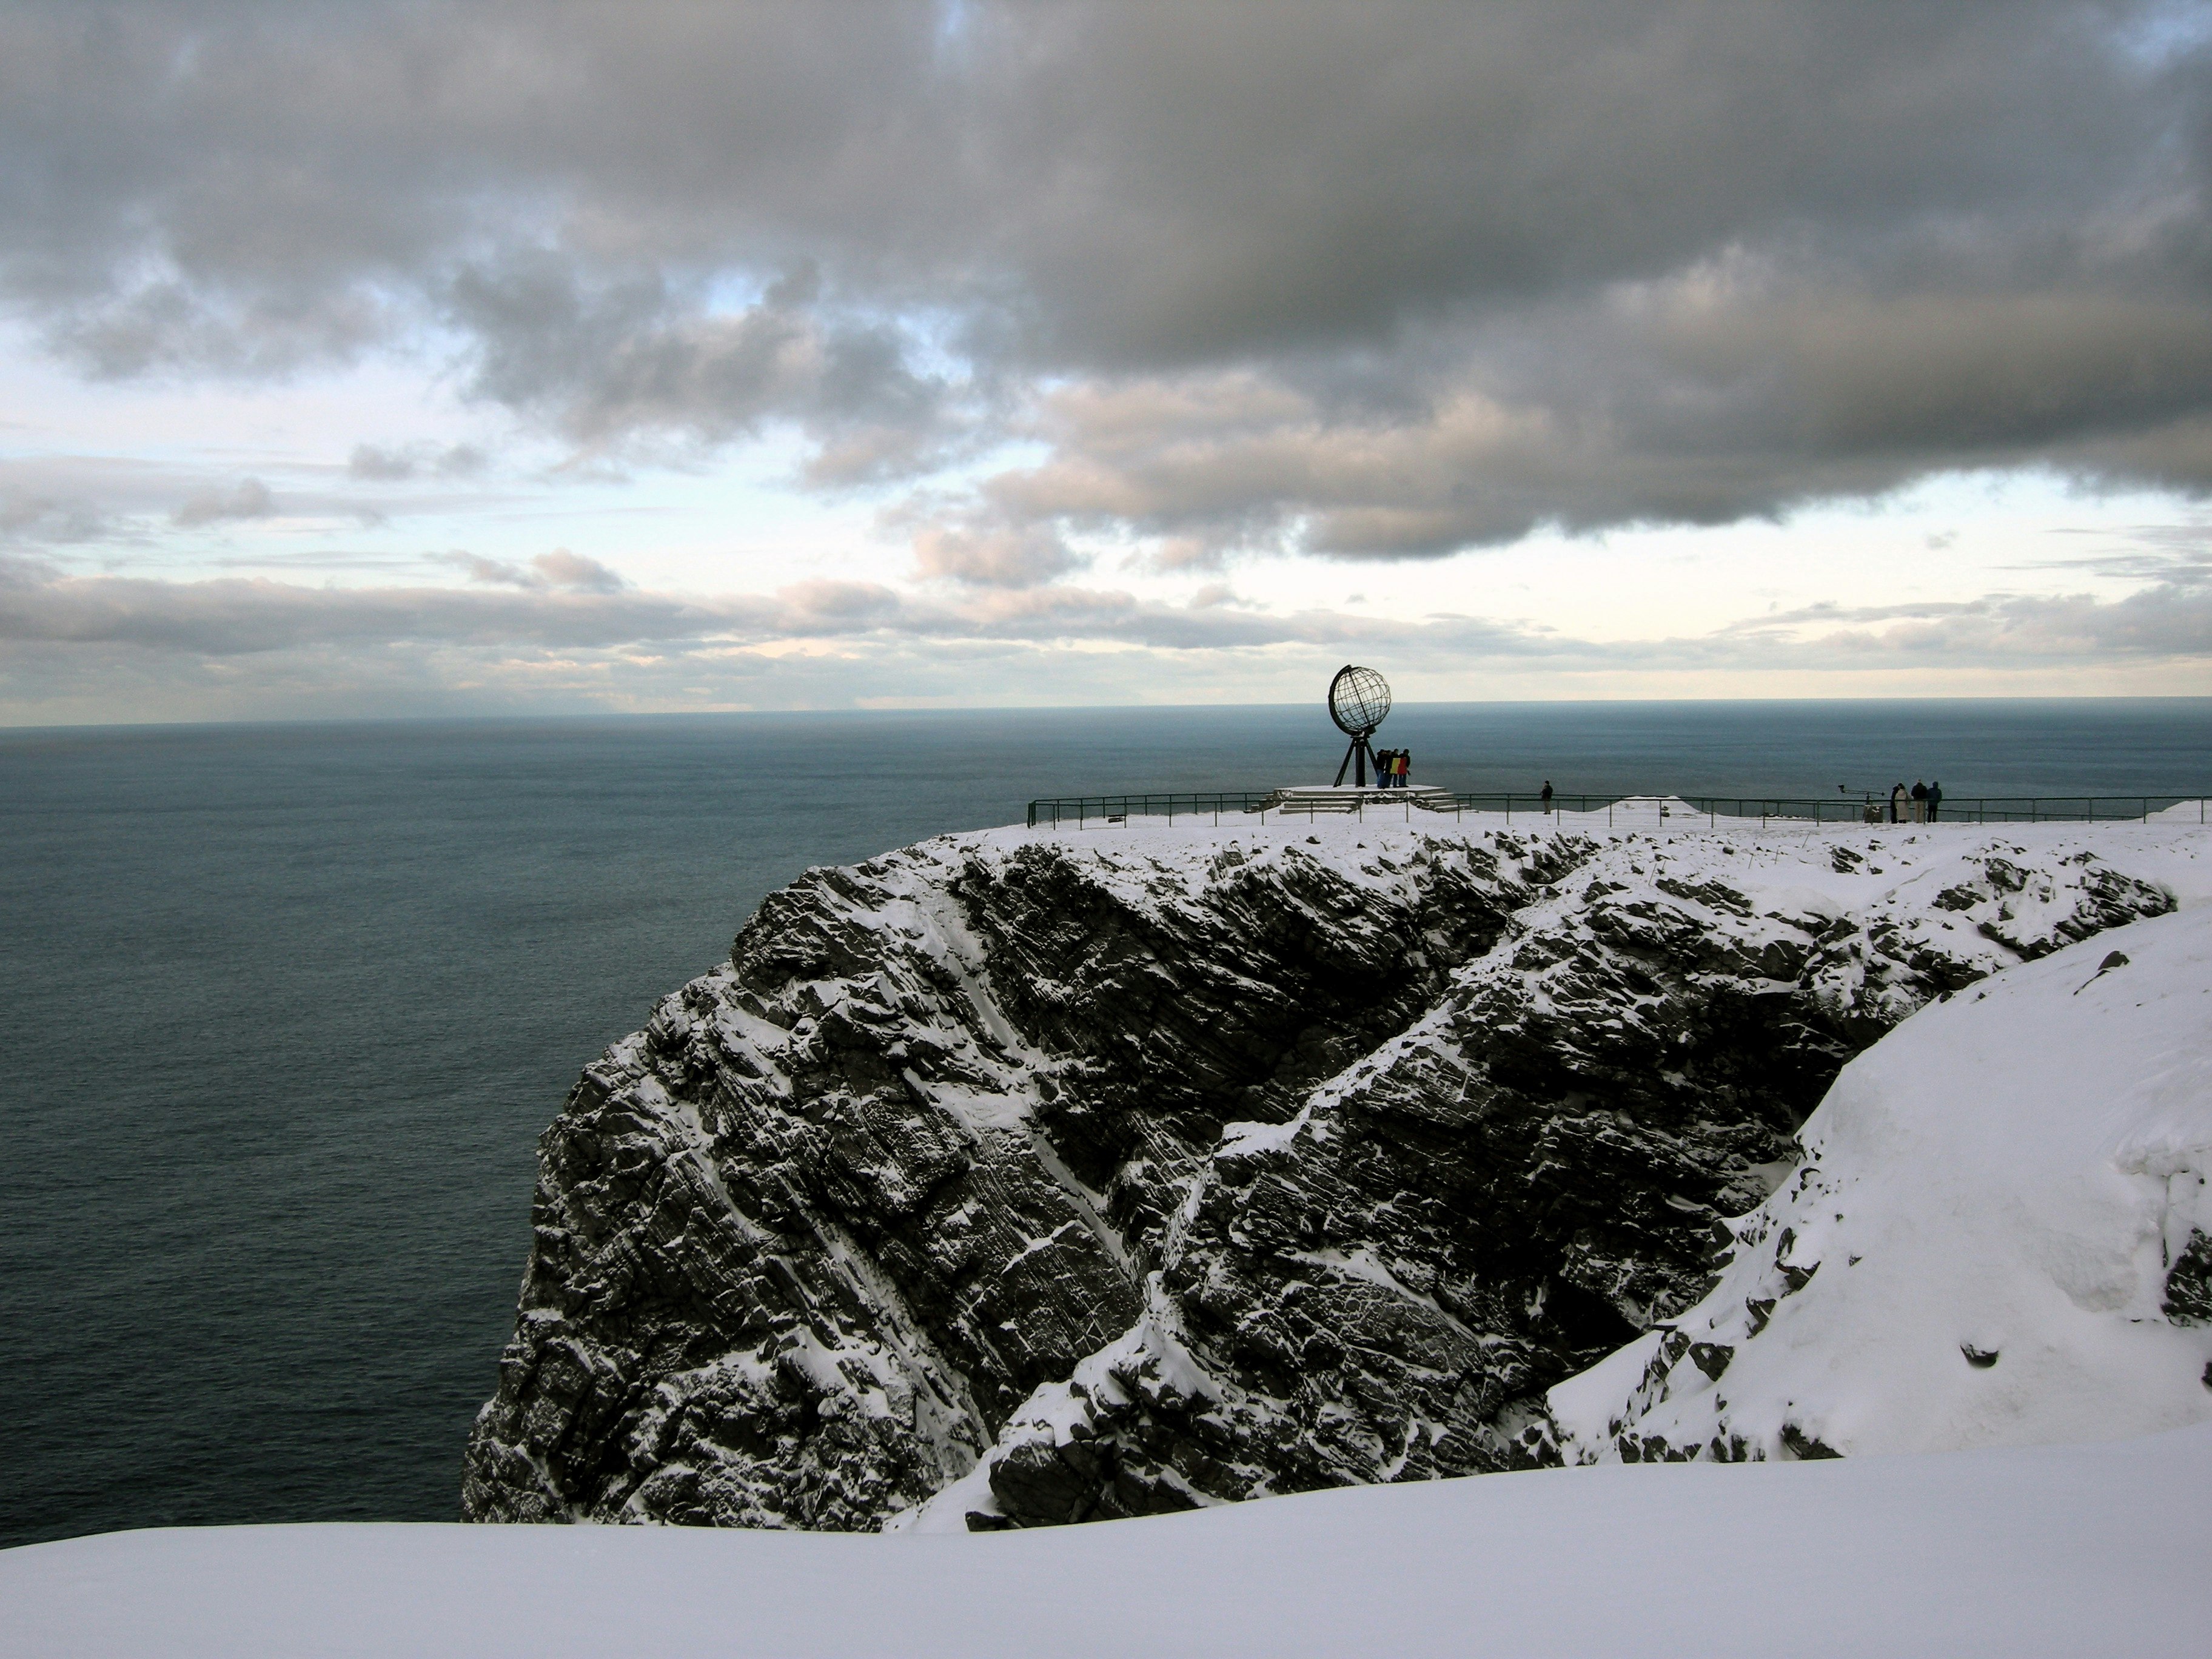 A scene of a snow-covered, rocky cliff-face, with dark grey-blue sea visible below and beyond. There is a globe-shaped monument on the cliff, and a few people can be seen around it, and looking out at the view.